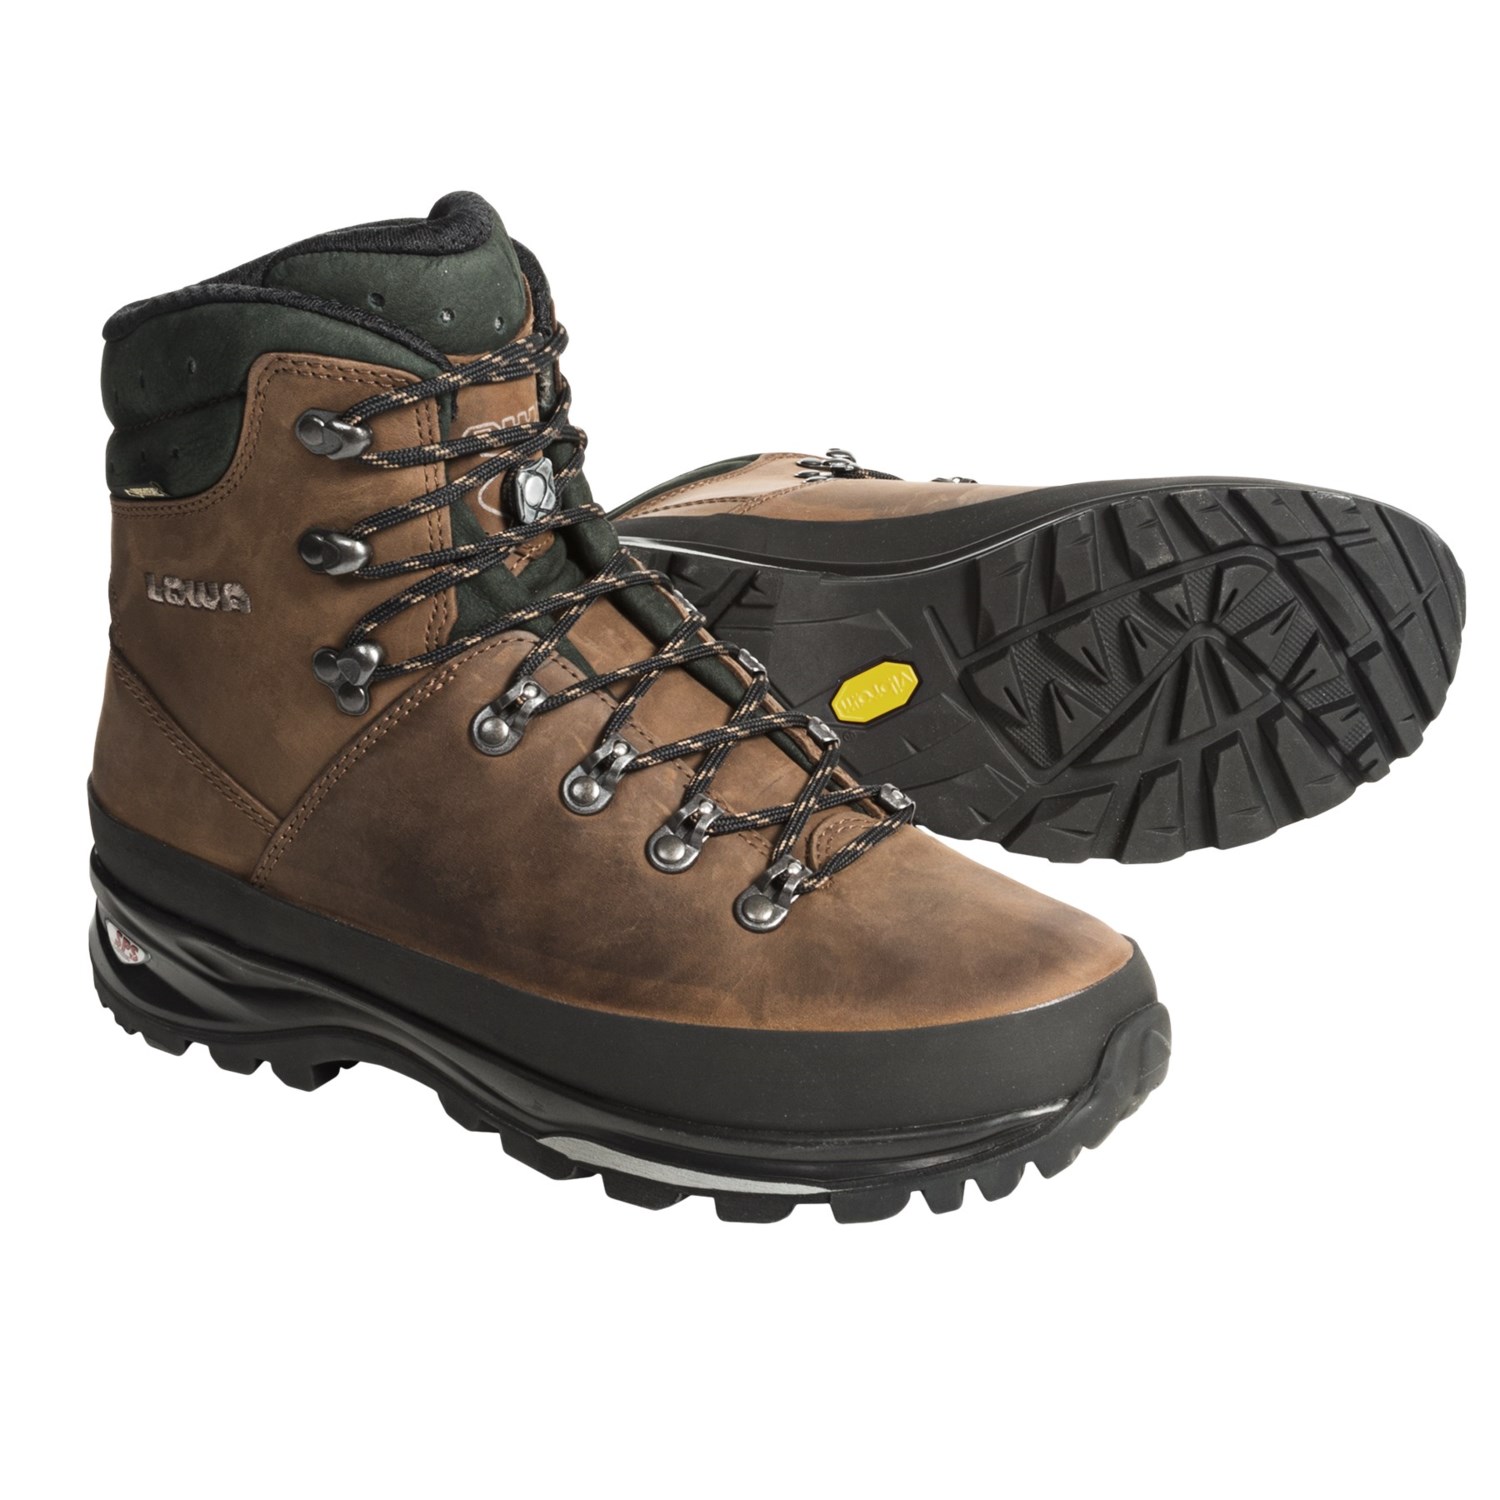 Lowa Ranger II Gore-Tex® Hunting Boots (For Men) - Save 40%